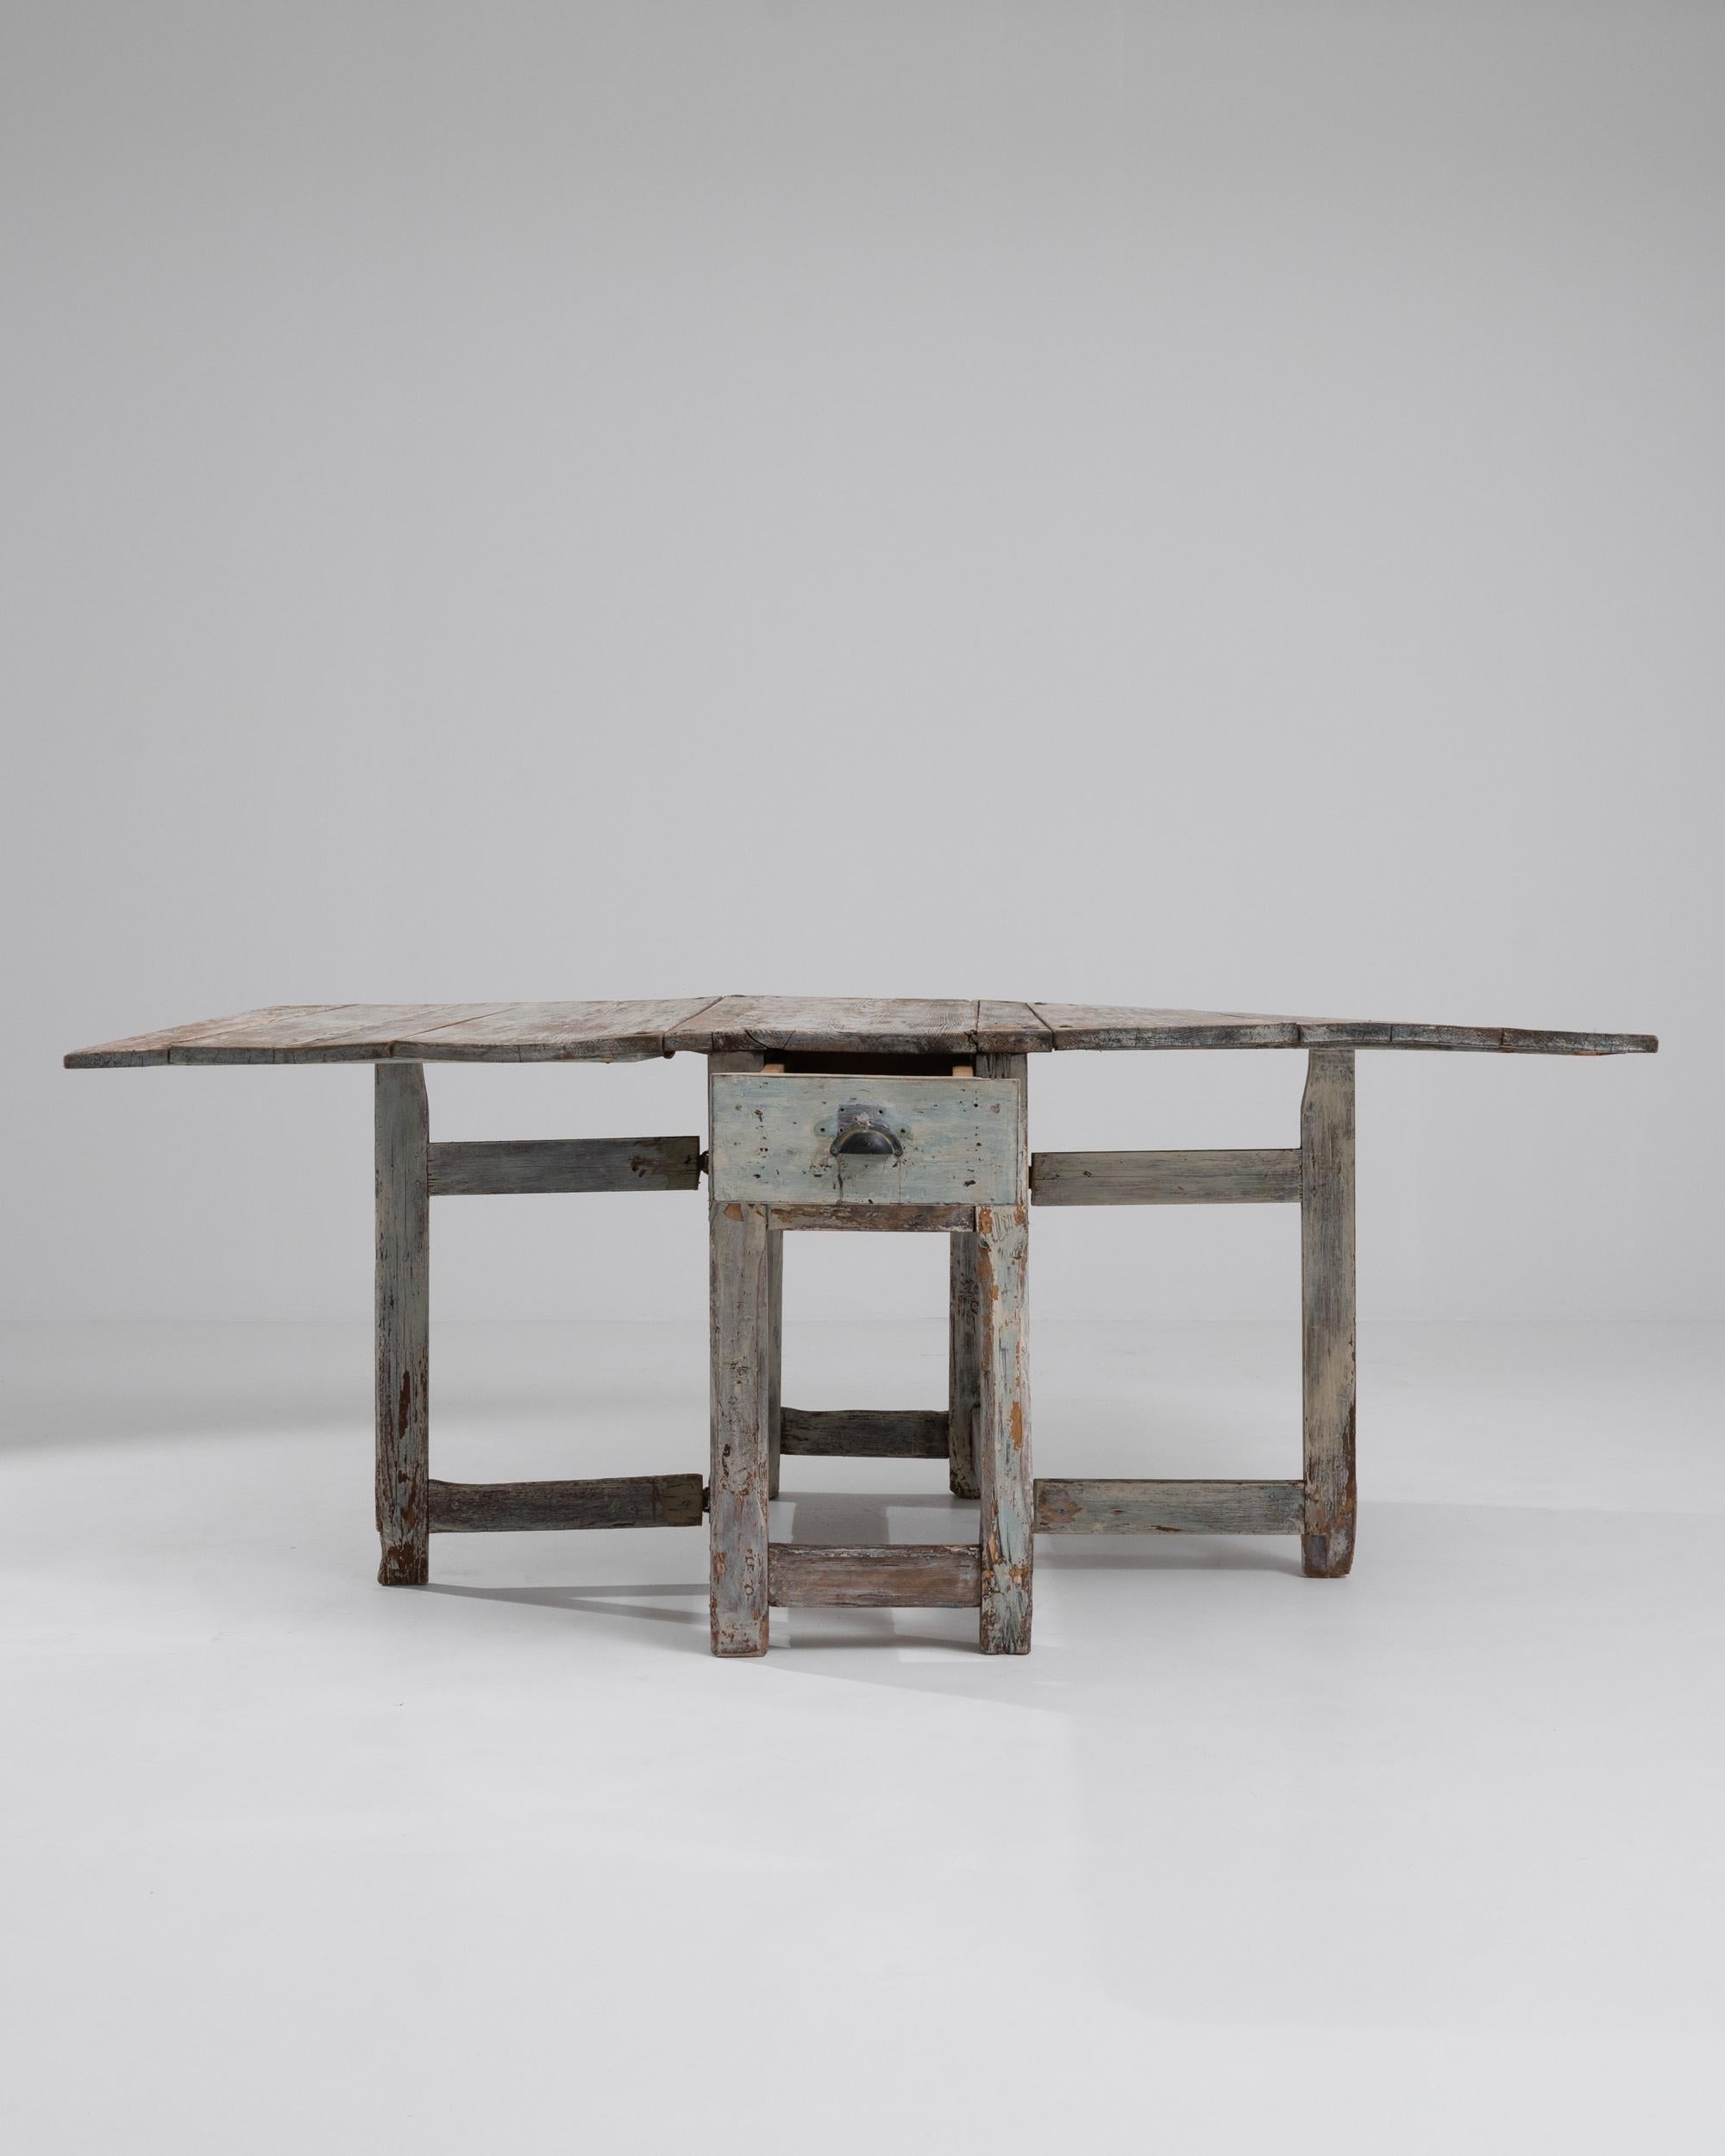 Made in Sweden in the 1800s, this rustic wooden table brims with personality. The design is simple yet versatile: the broad wings of the wooden tabletop can be closed to form a narrow unit, or opened out on gated legs to offer an ample work surface.